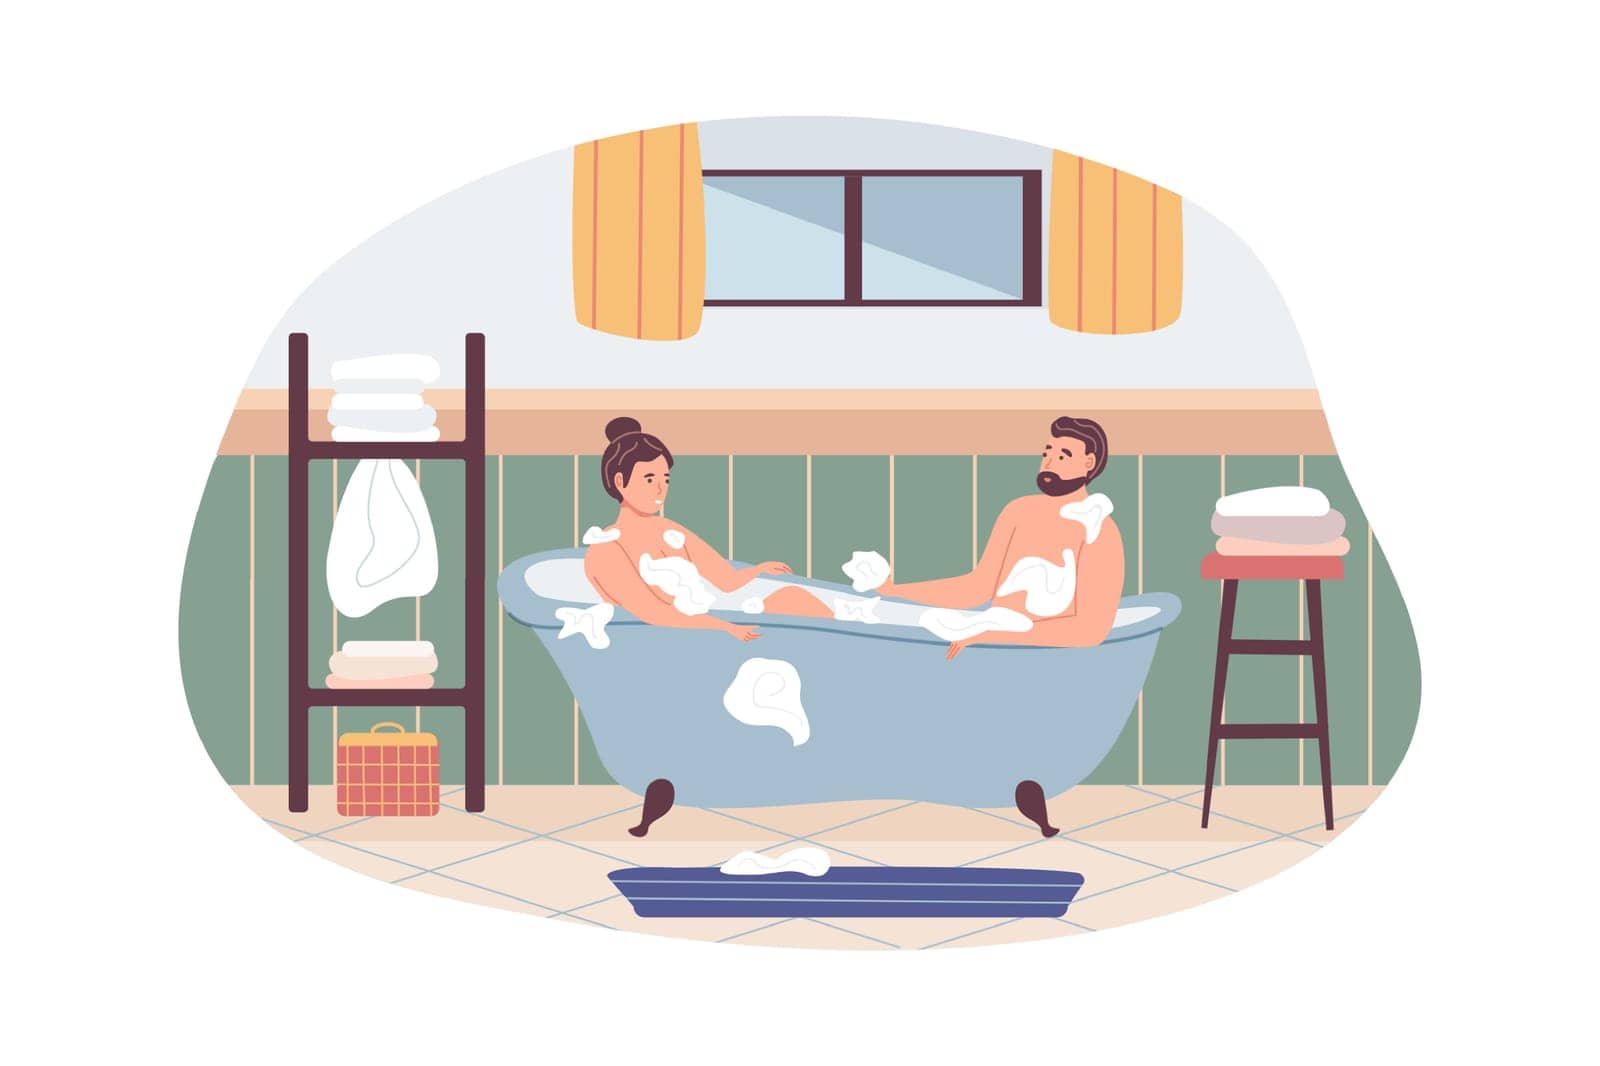 Everyday routine scene from the morning habit. A young woman and man take a bath. by ircydraw